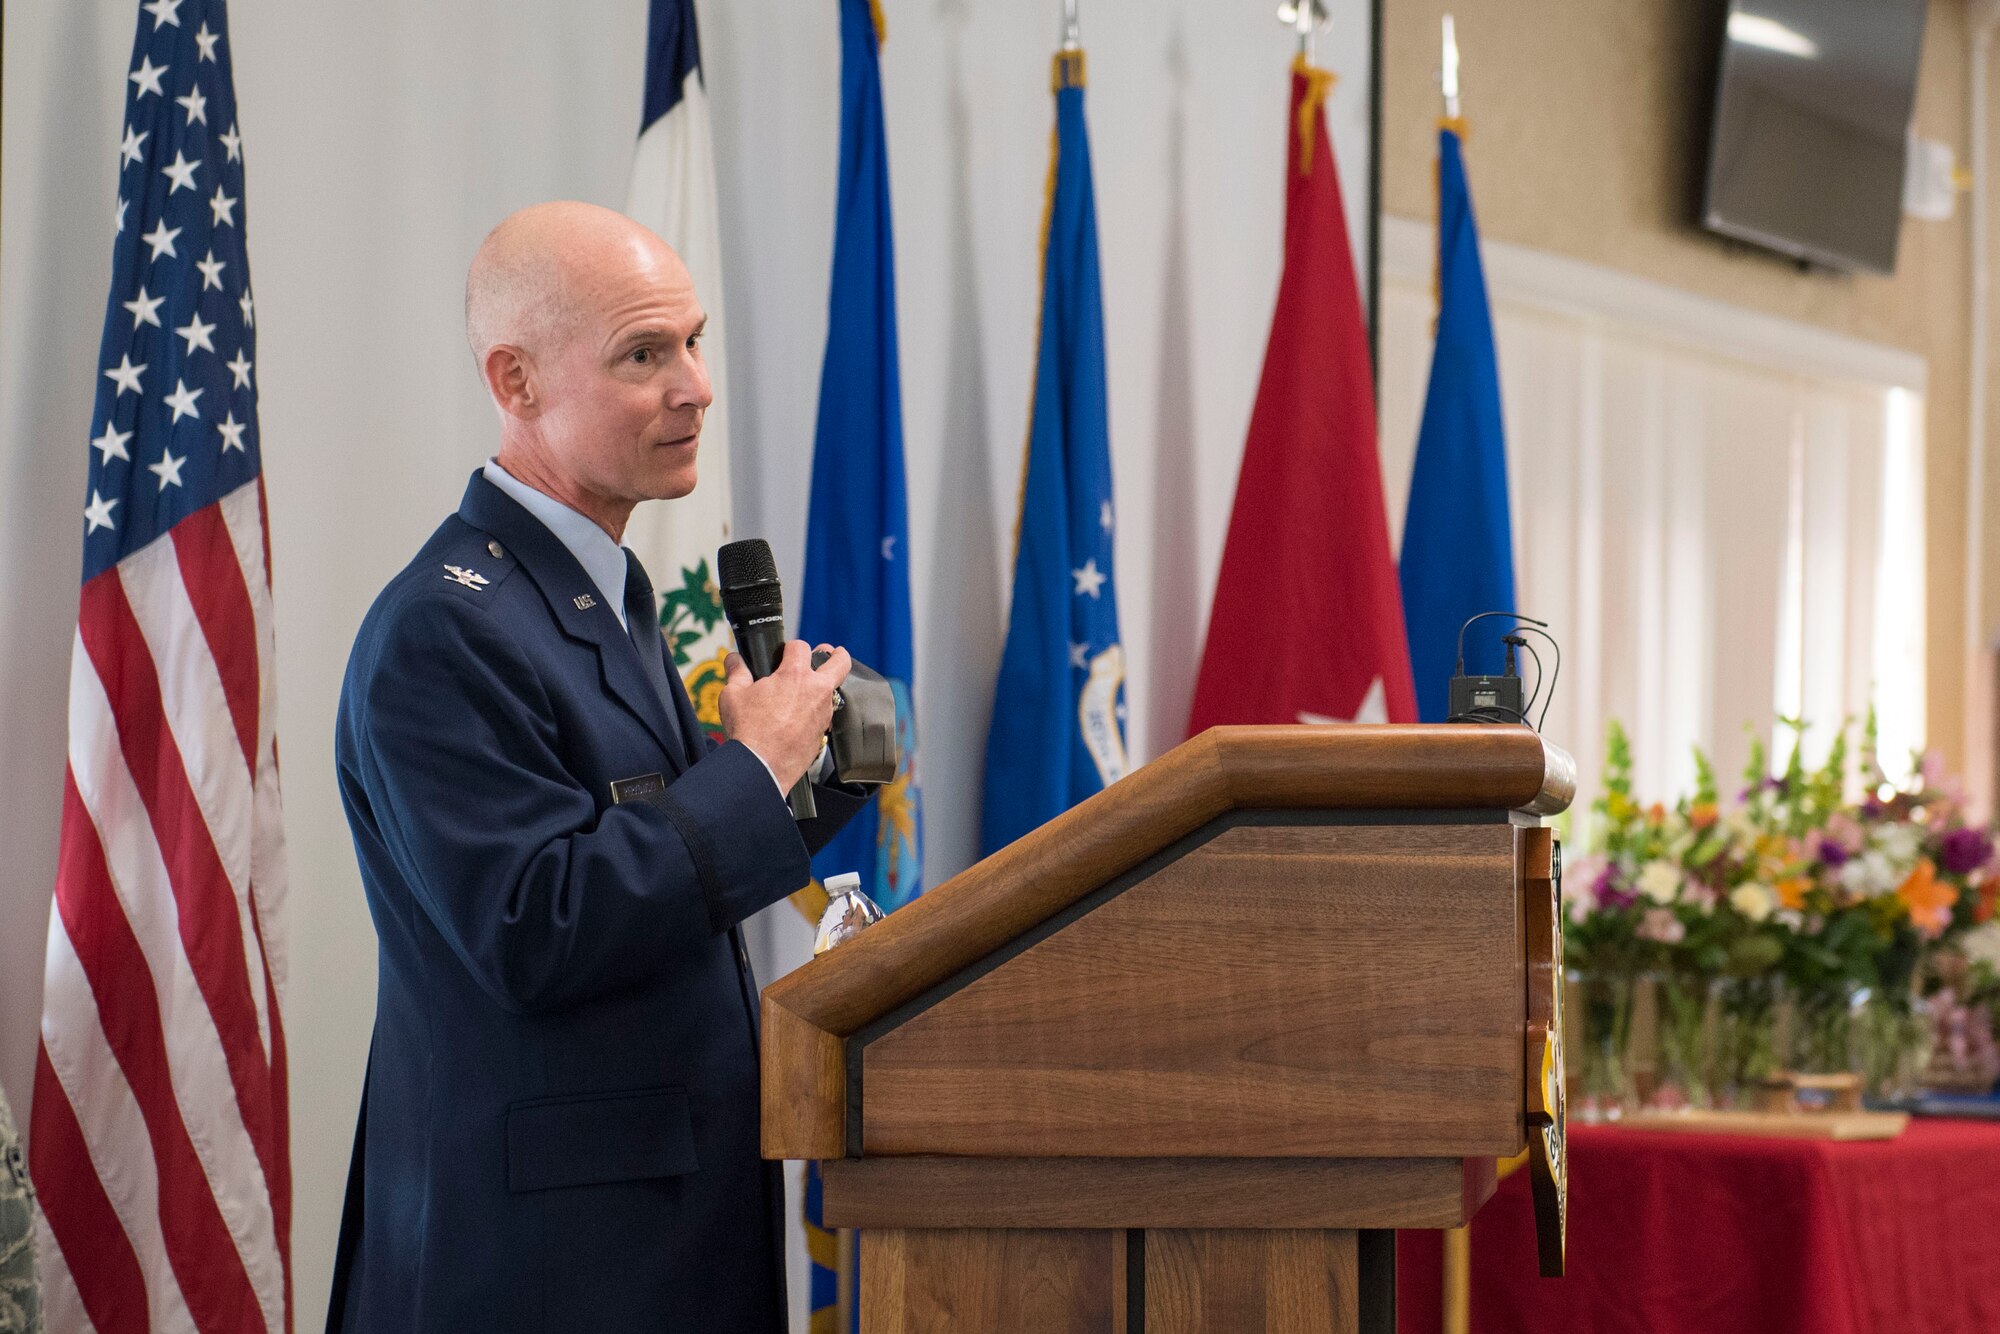 Col. Shaun Perkowski, the former wing commander for the 167th Airlift Wing, addresses the audience at his retirement ceremony at the 167th AW, April 6, 2019. Perkowski was the 167th AW commander from October 2013- October 2018. (U.S. Air National Guard photo by Tech. Sgt. Jodie Witmer)